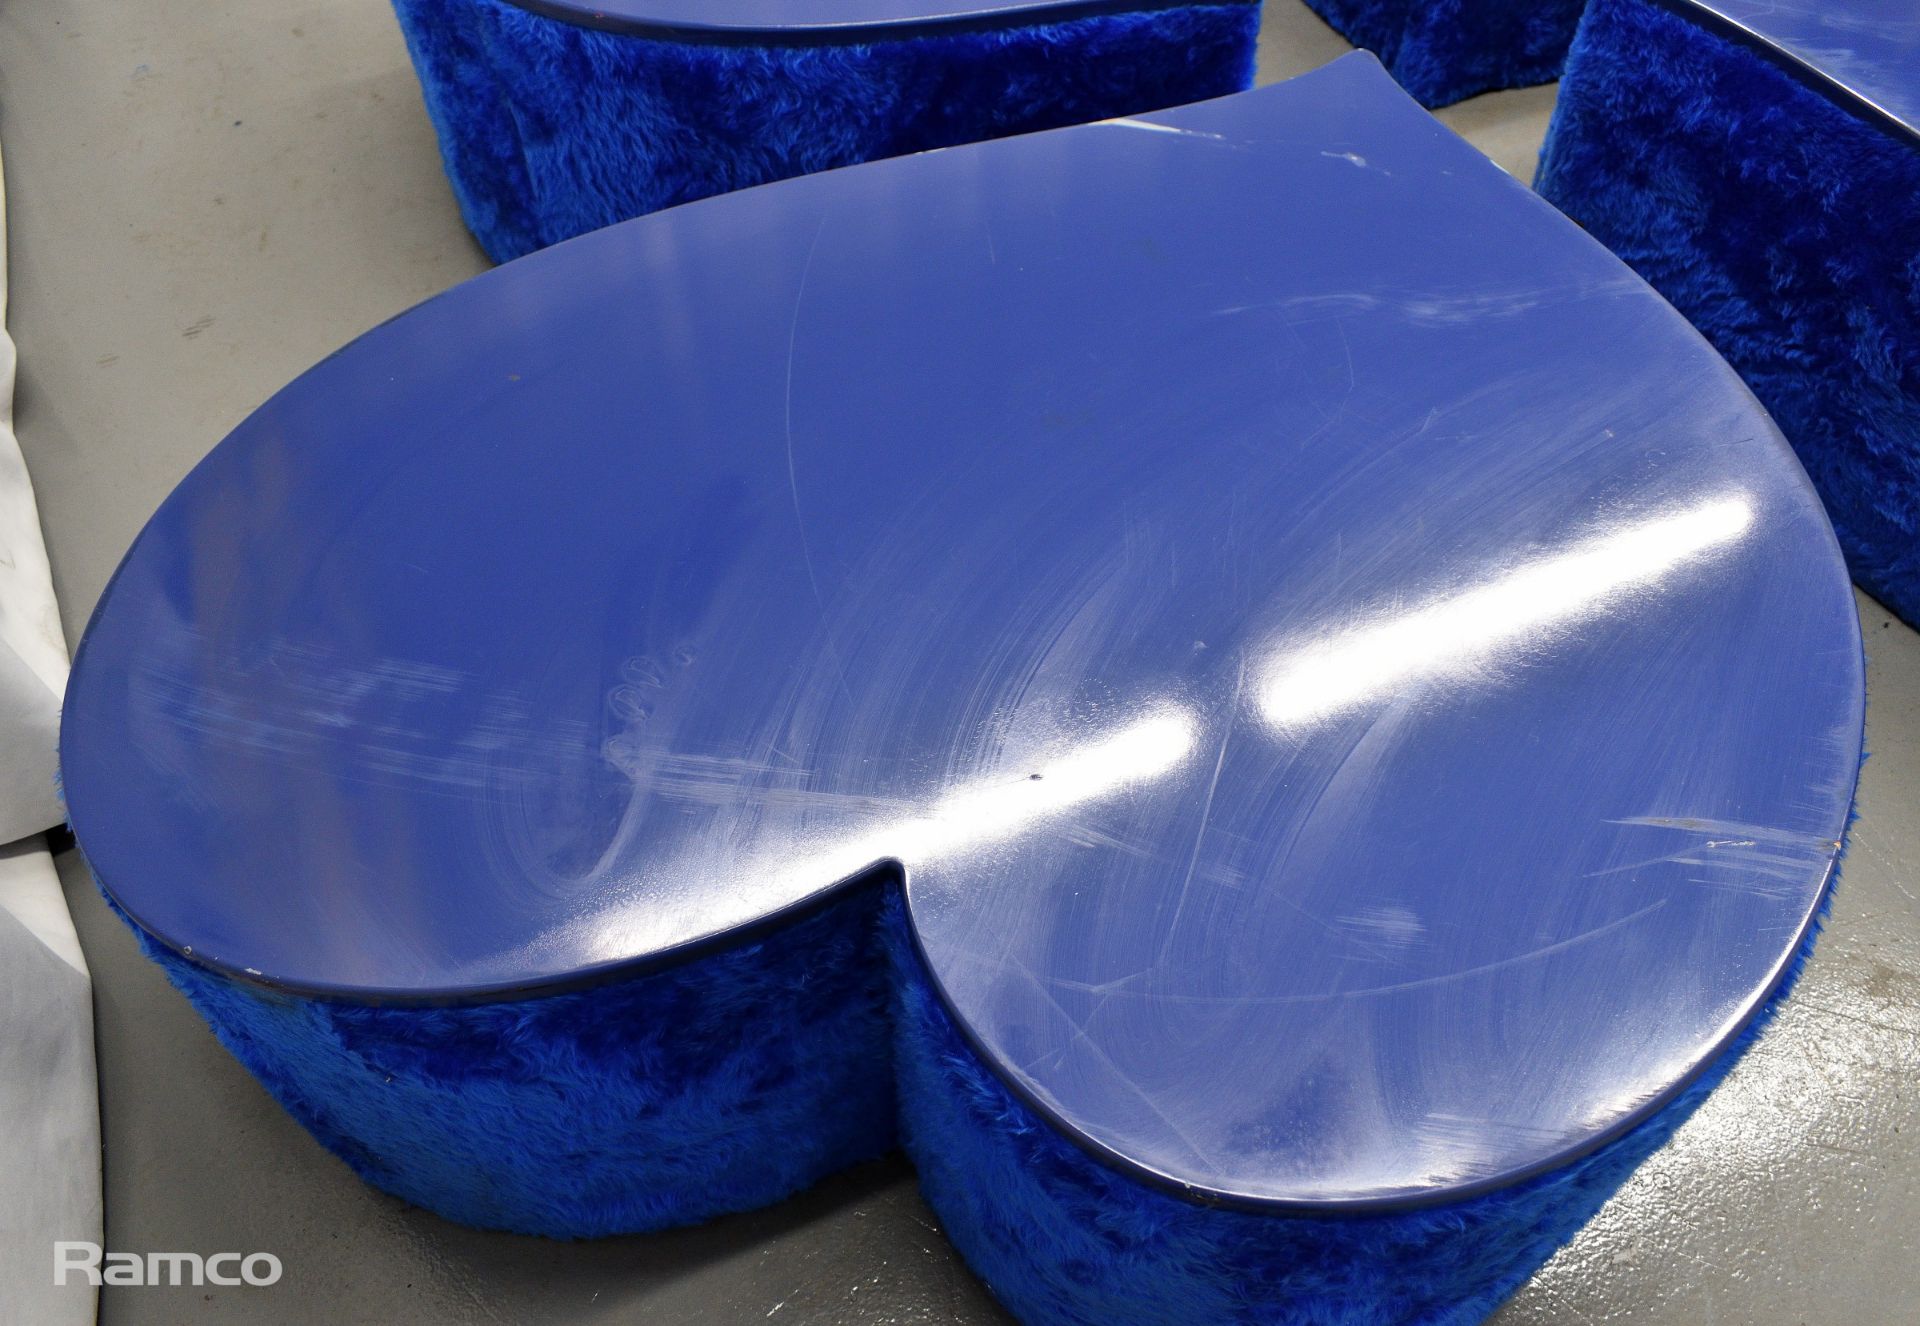 4x Asymmetrical heart shaped blue fur-covered wooden tables from countries' seating area - Image 10 of 18